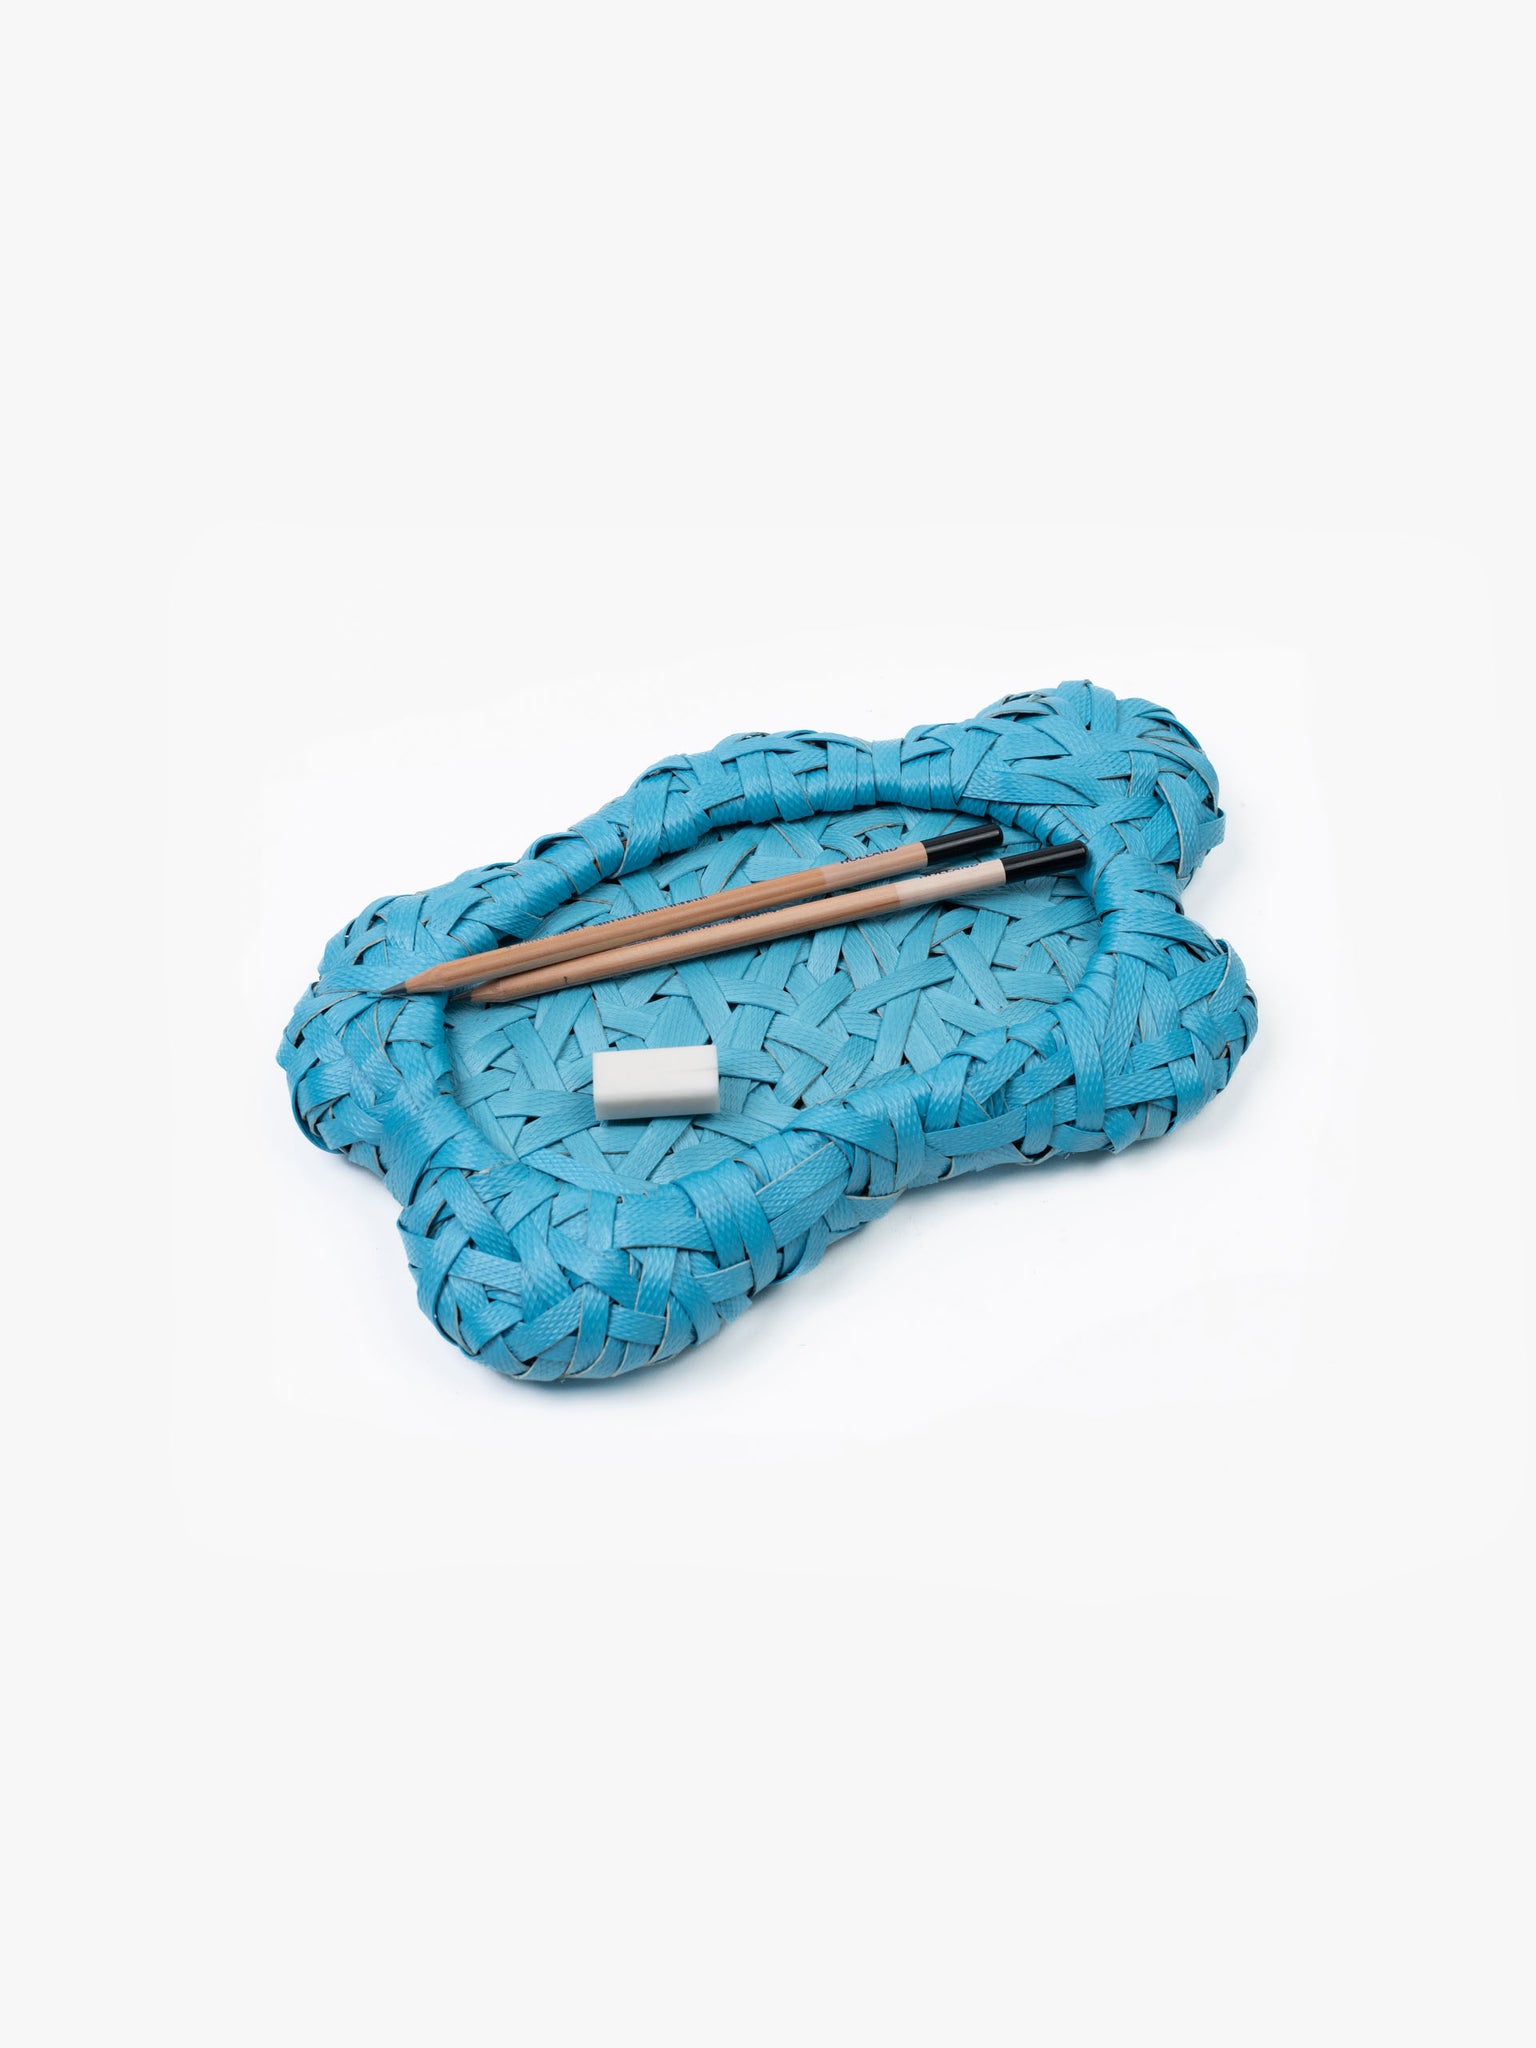 Recycled Plastic Woven Ecology Tray Blue